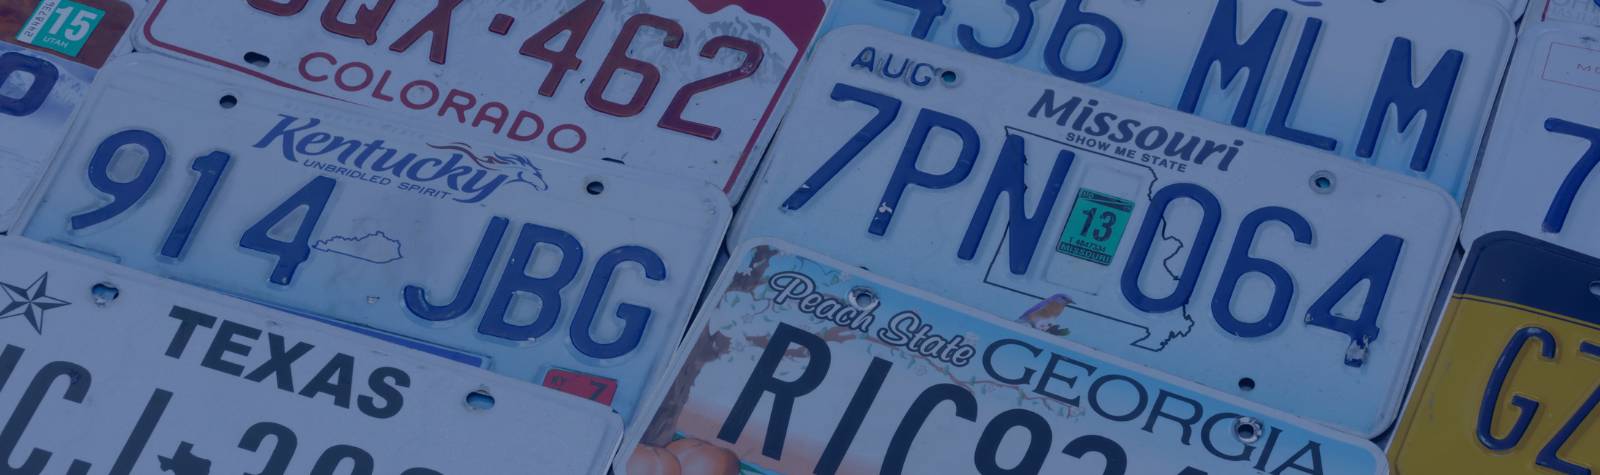 What To Do With Your License Plates